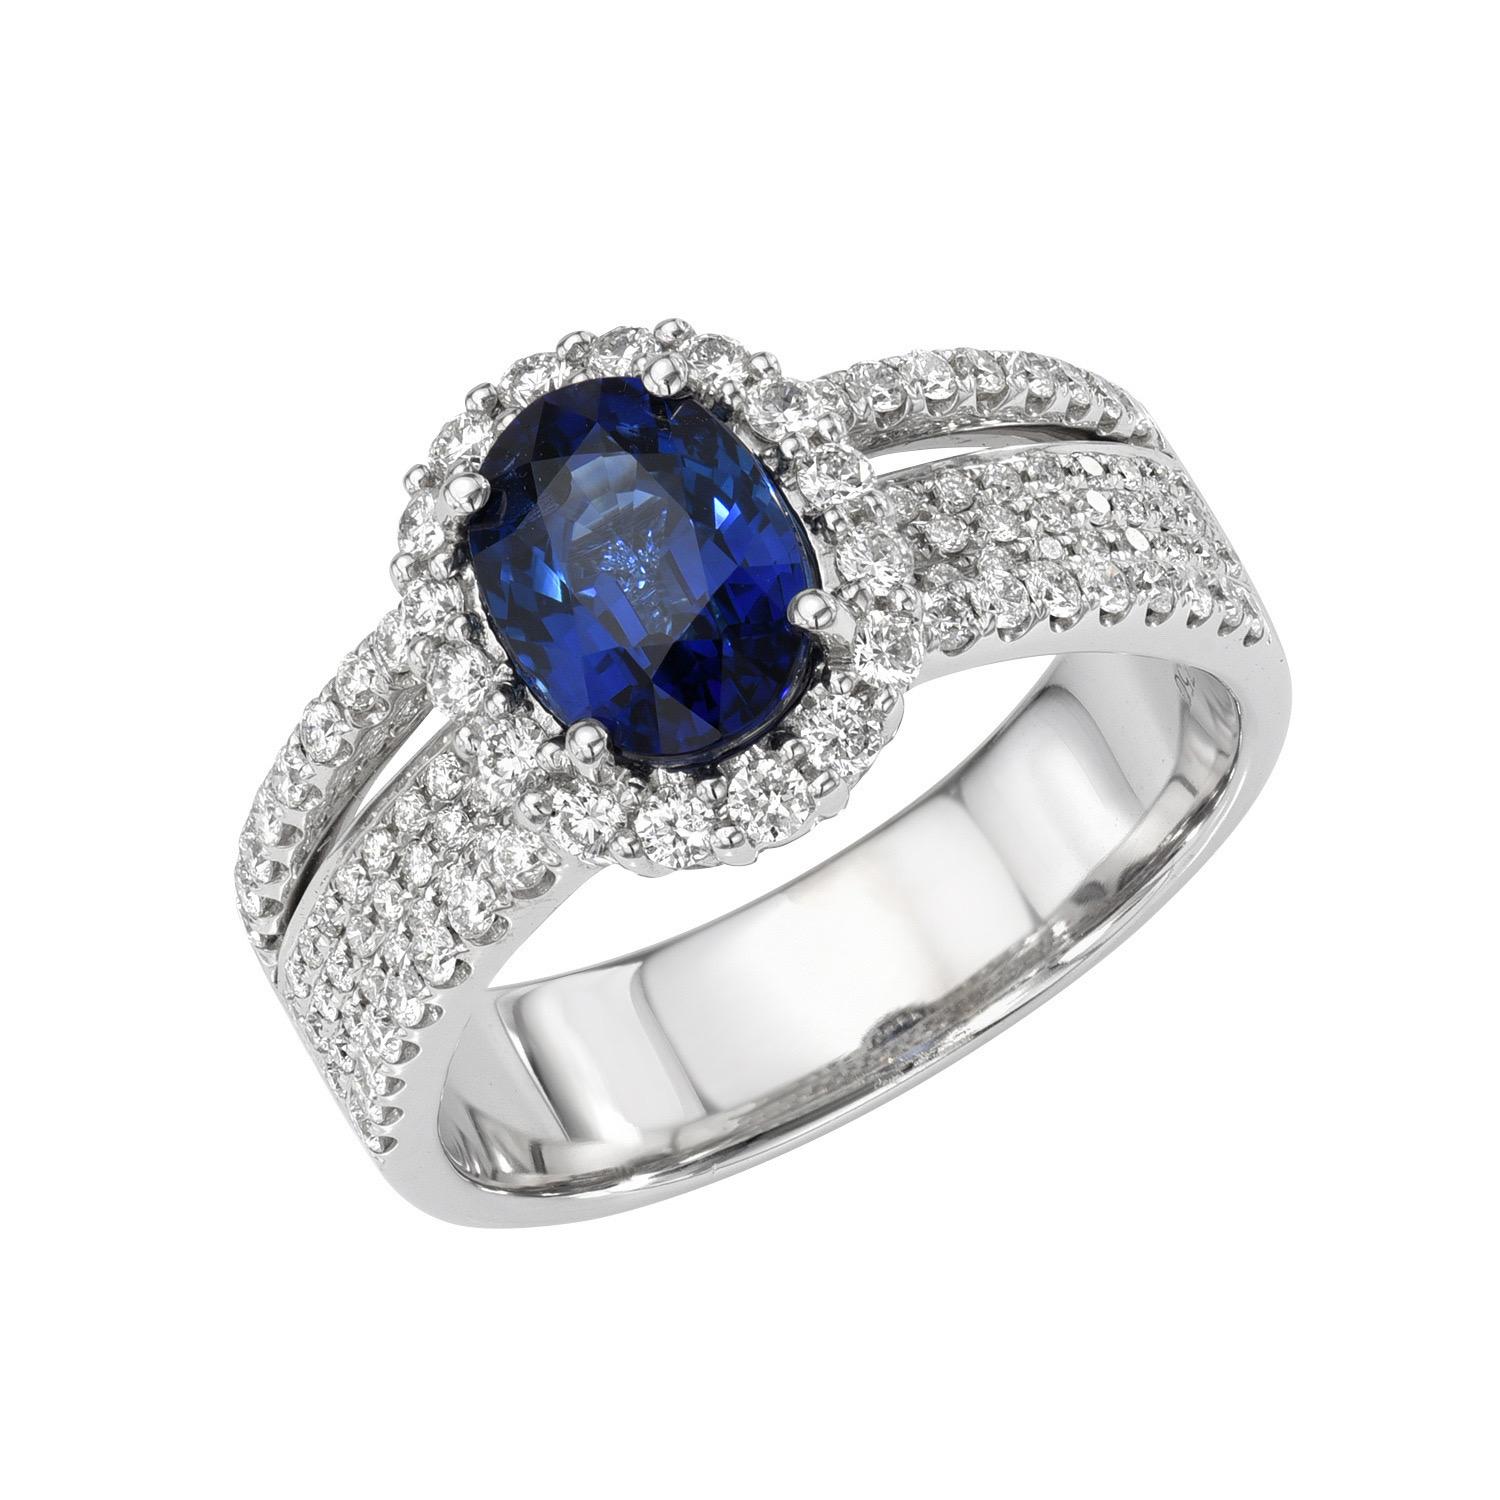 Contemporary Blue Sapphire Ring 1.48 Carat Oval For Sale